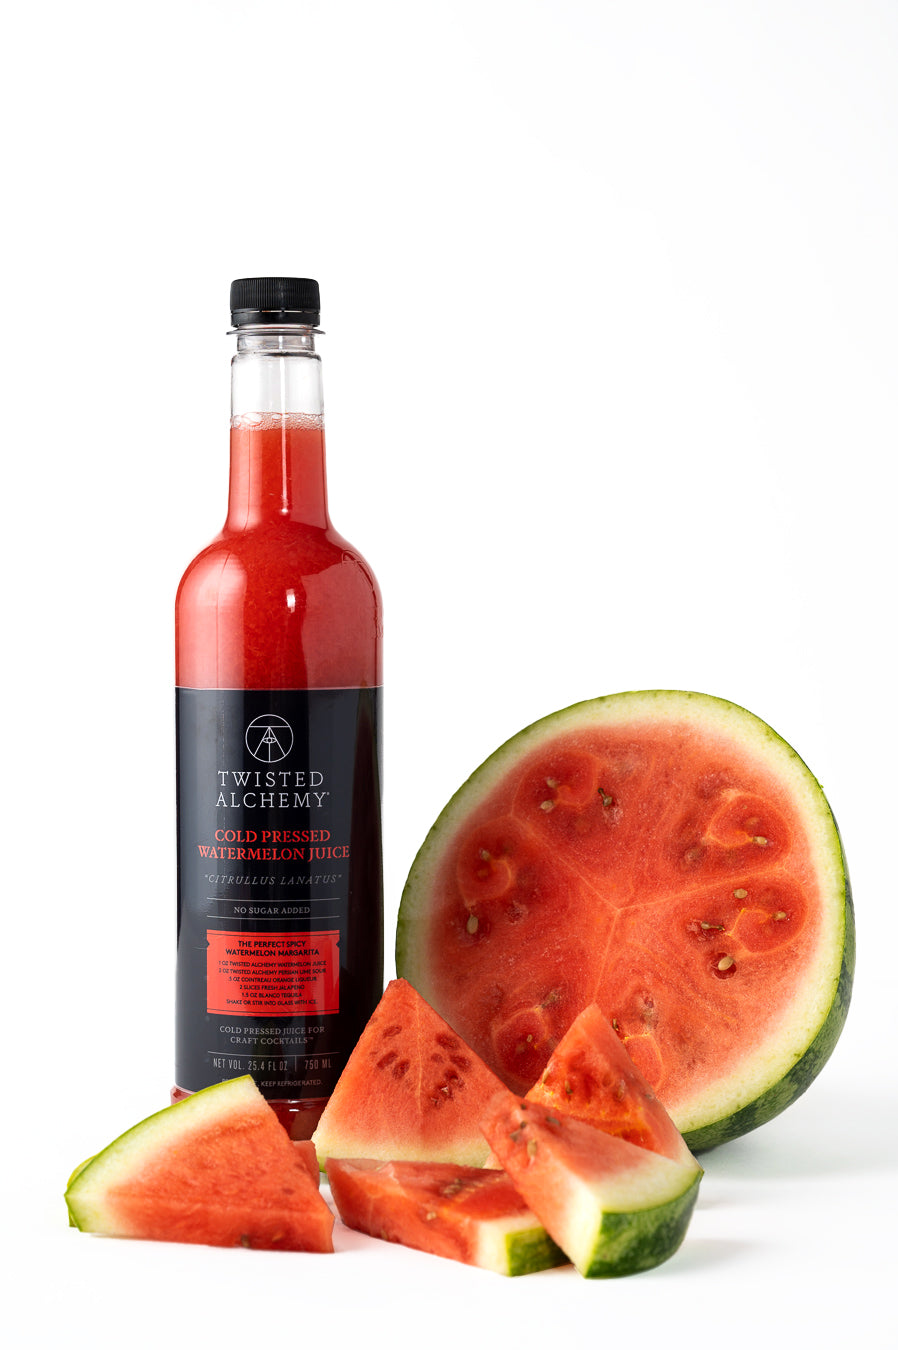 All About Watermelon, Summer's Favorite Fruit